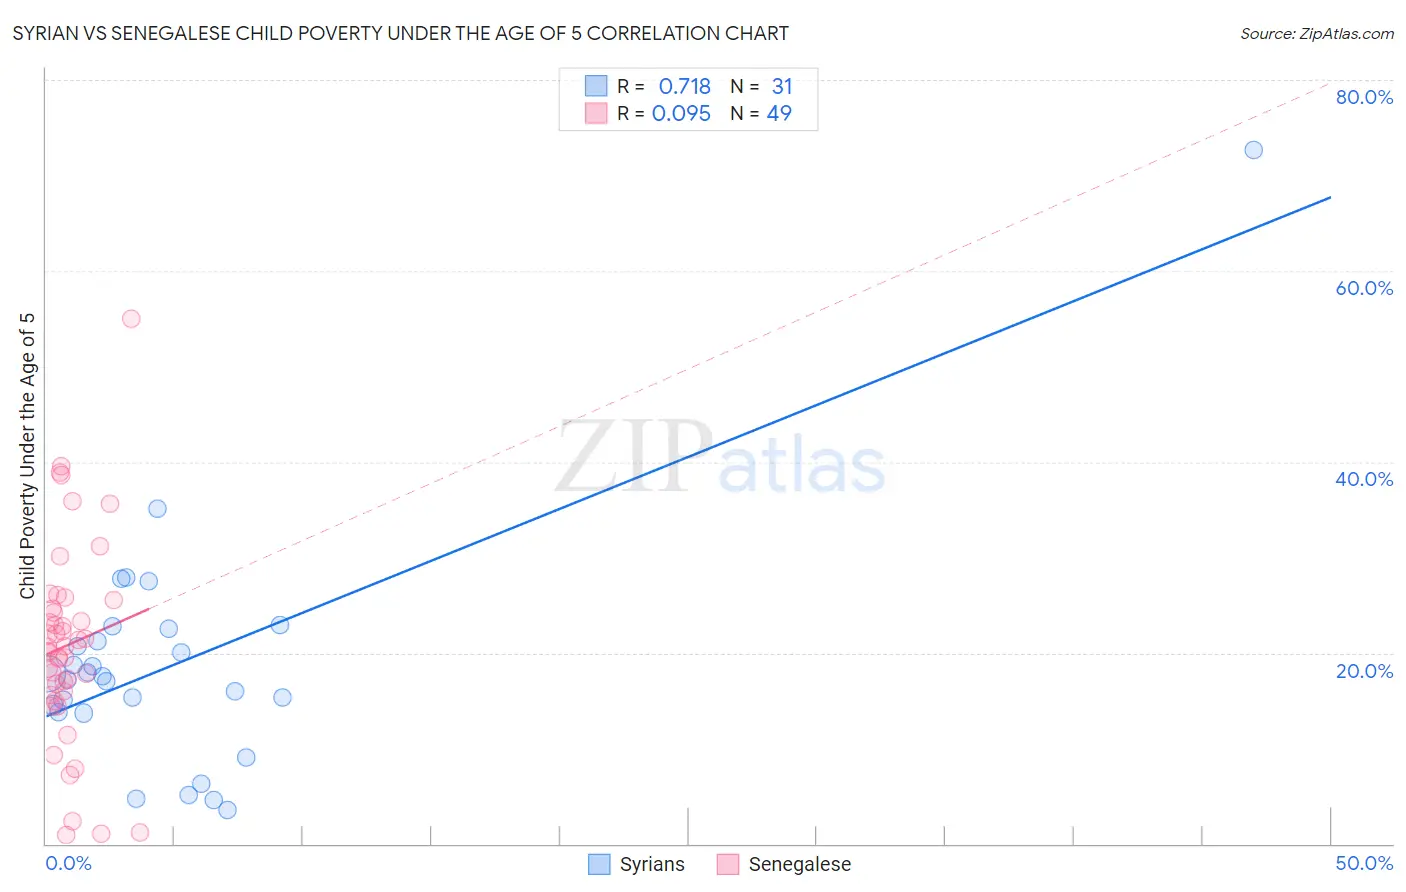 Syrian vs Senegalese Child Poverty Under the Age of 5